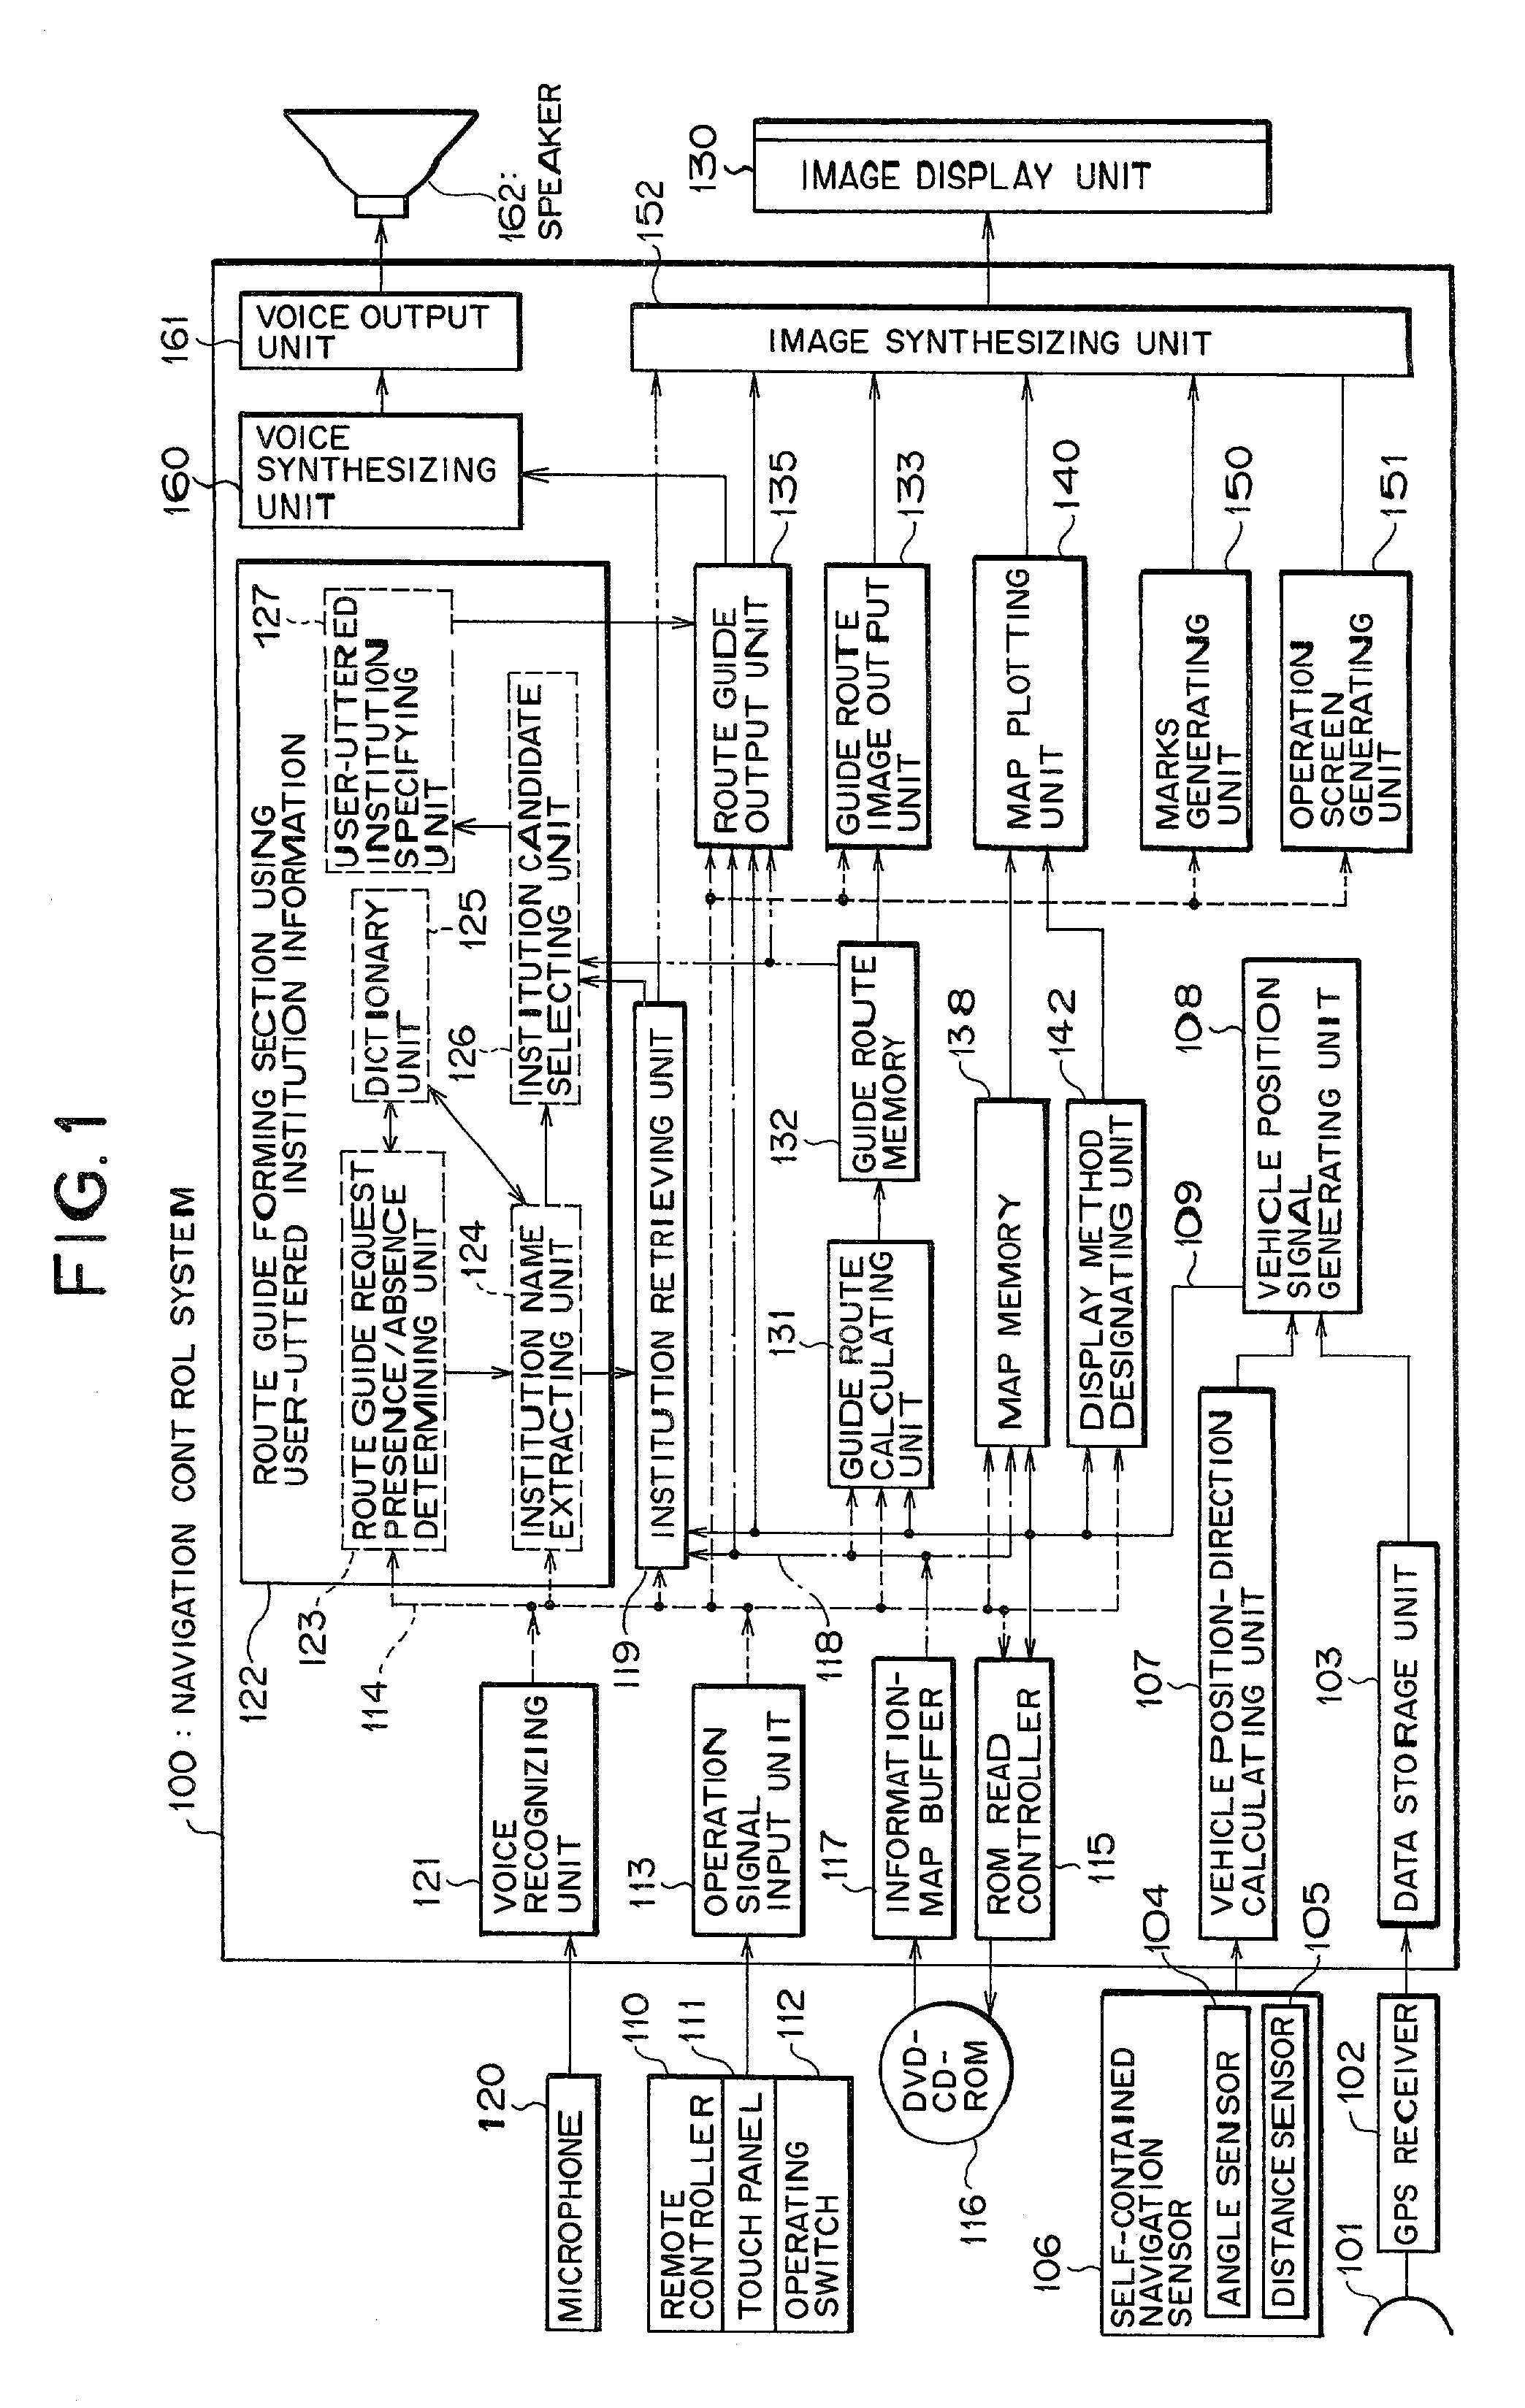 Method and system for route guiding